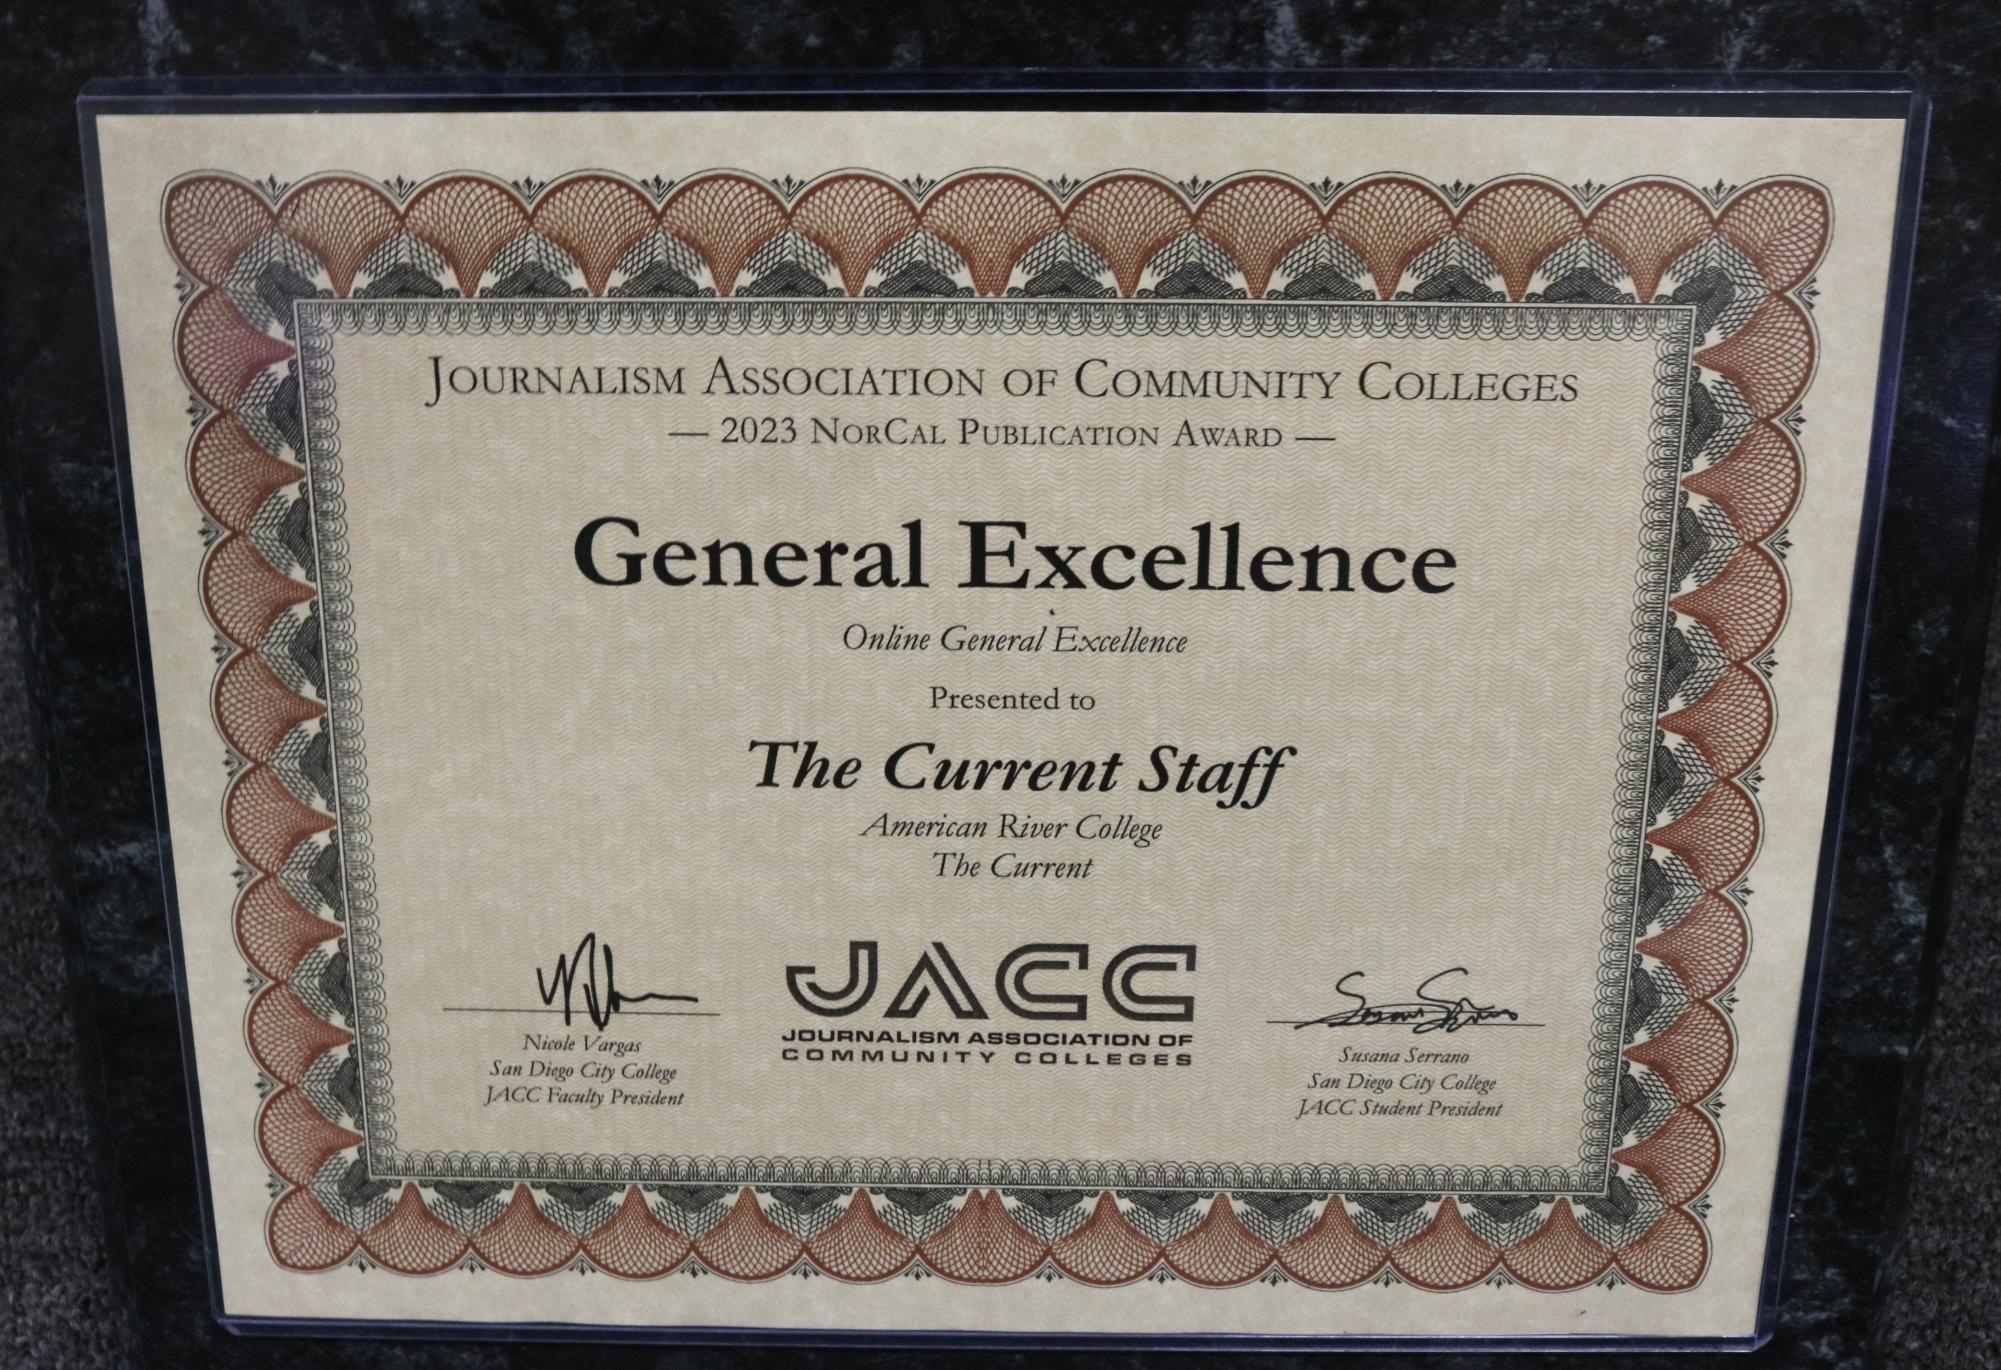 At this year’s Journalism Association of Community Colleges NorCal Regional Conference, The Current earned an Online General Excellence award for the second straight year. (Photo by Joseph Bianchini)